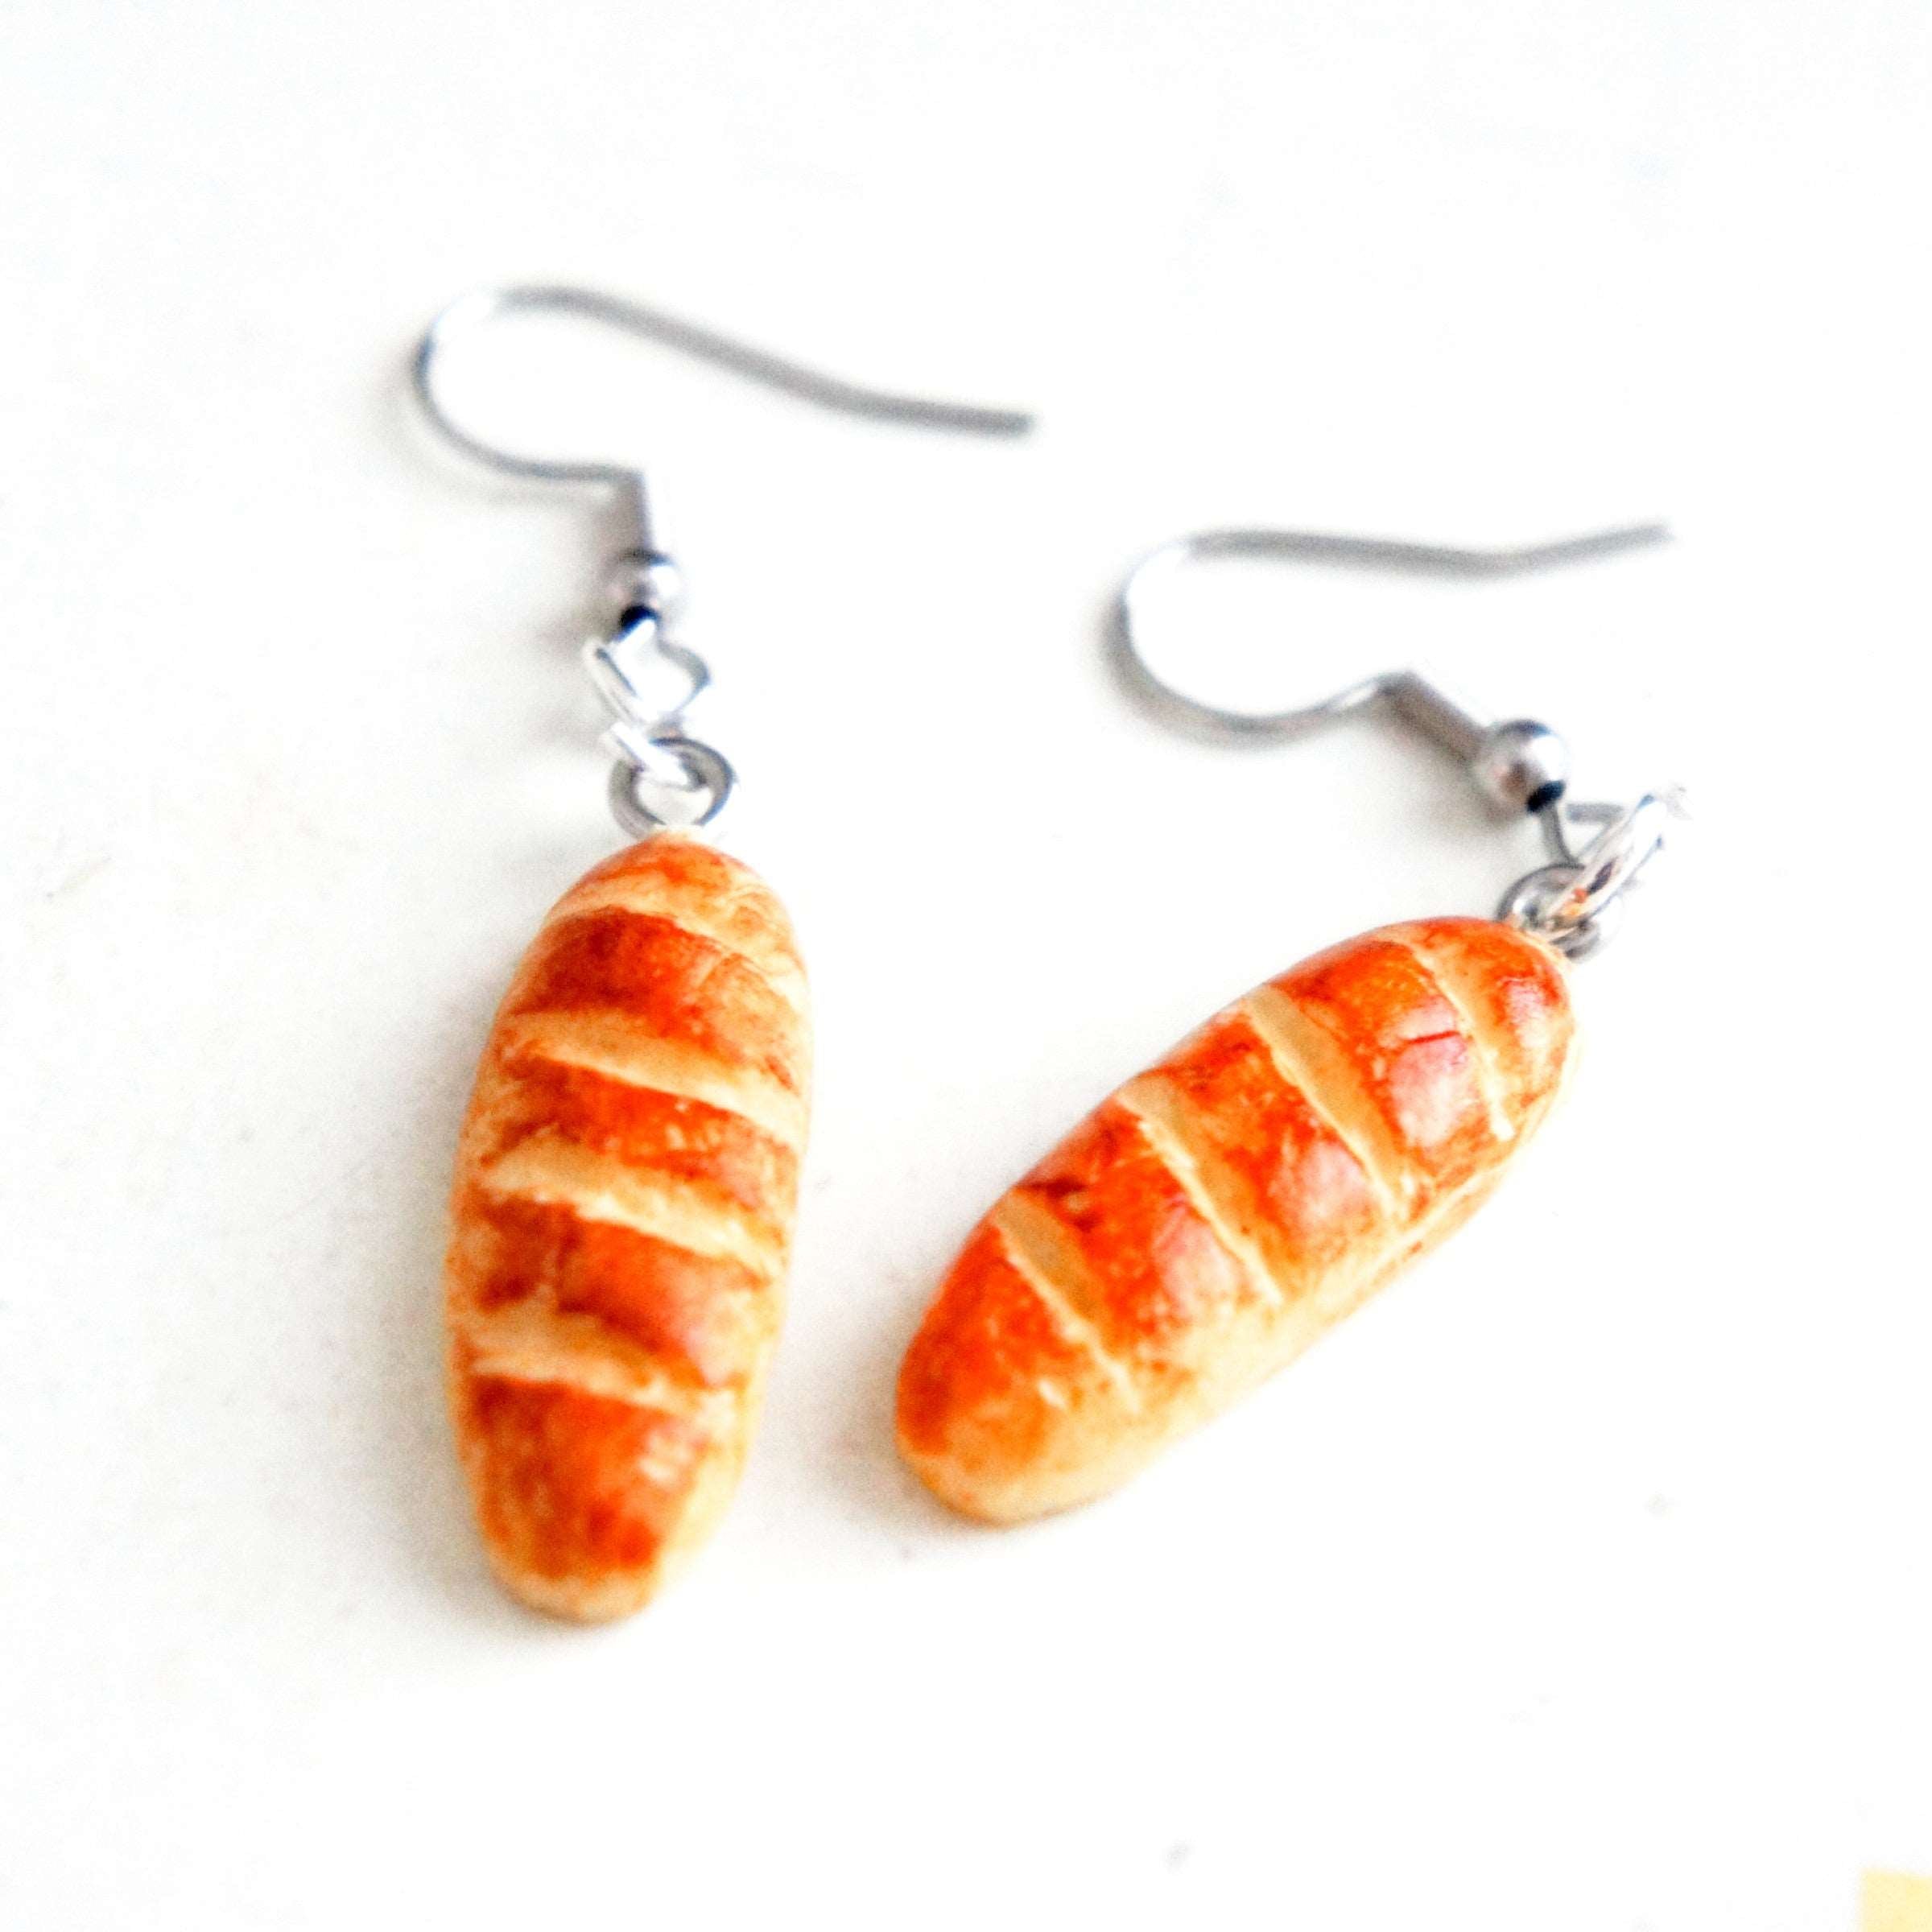 Baguette Bread Dangle Earrings - Jillicious charms and accessories